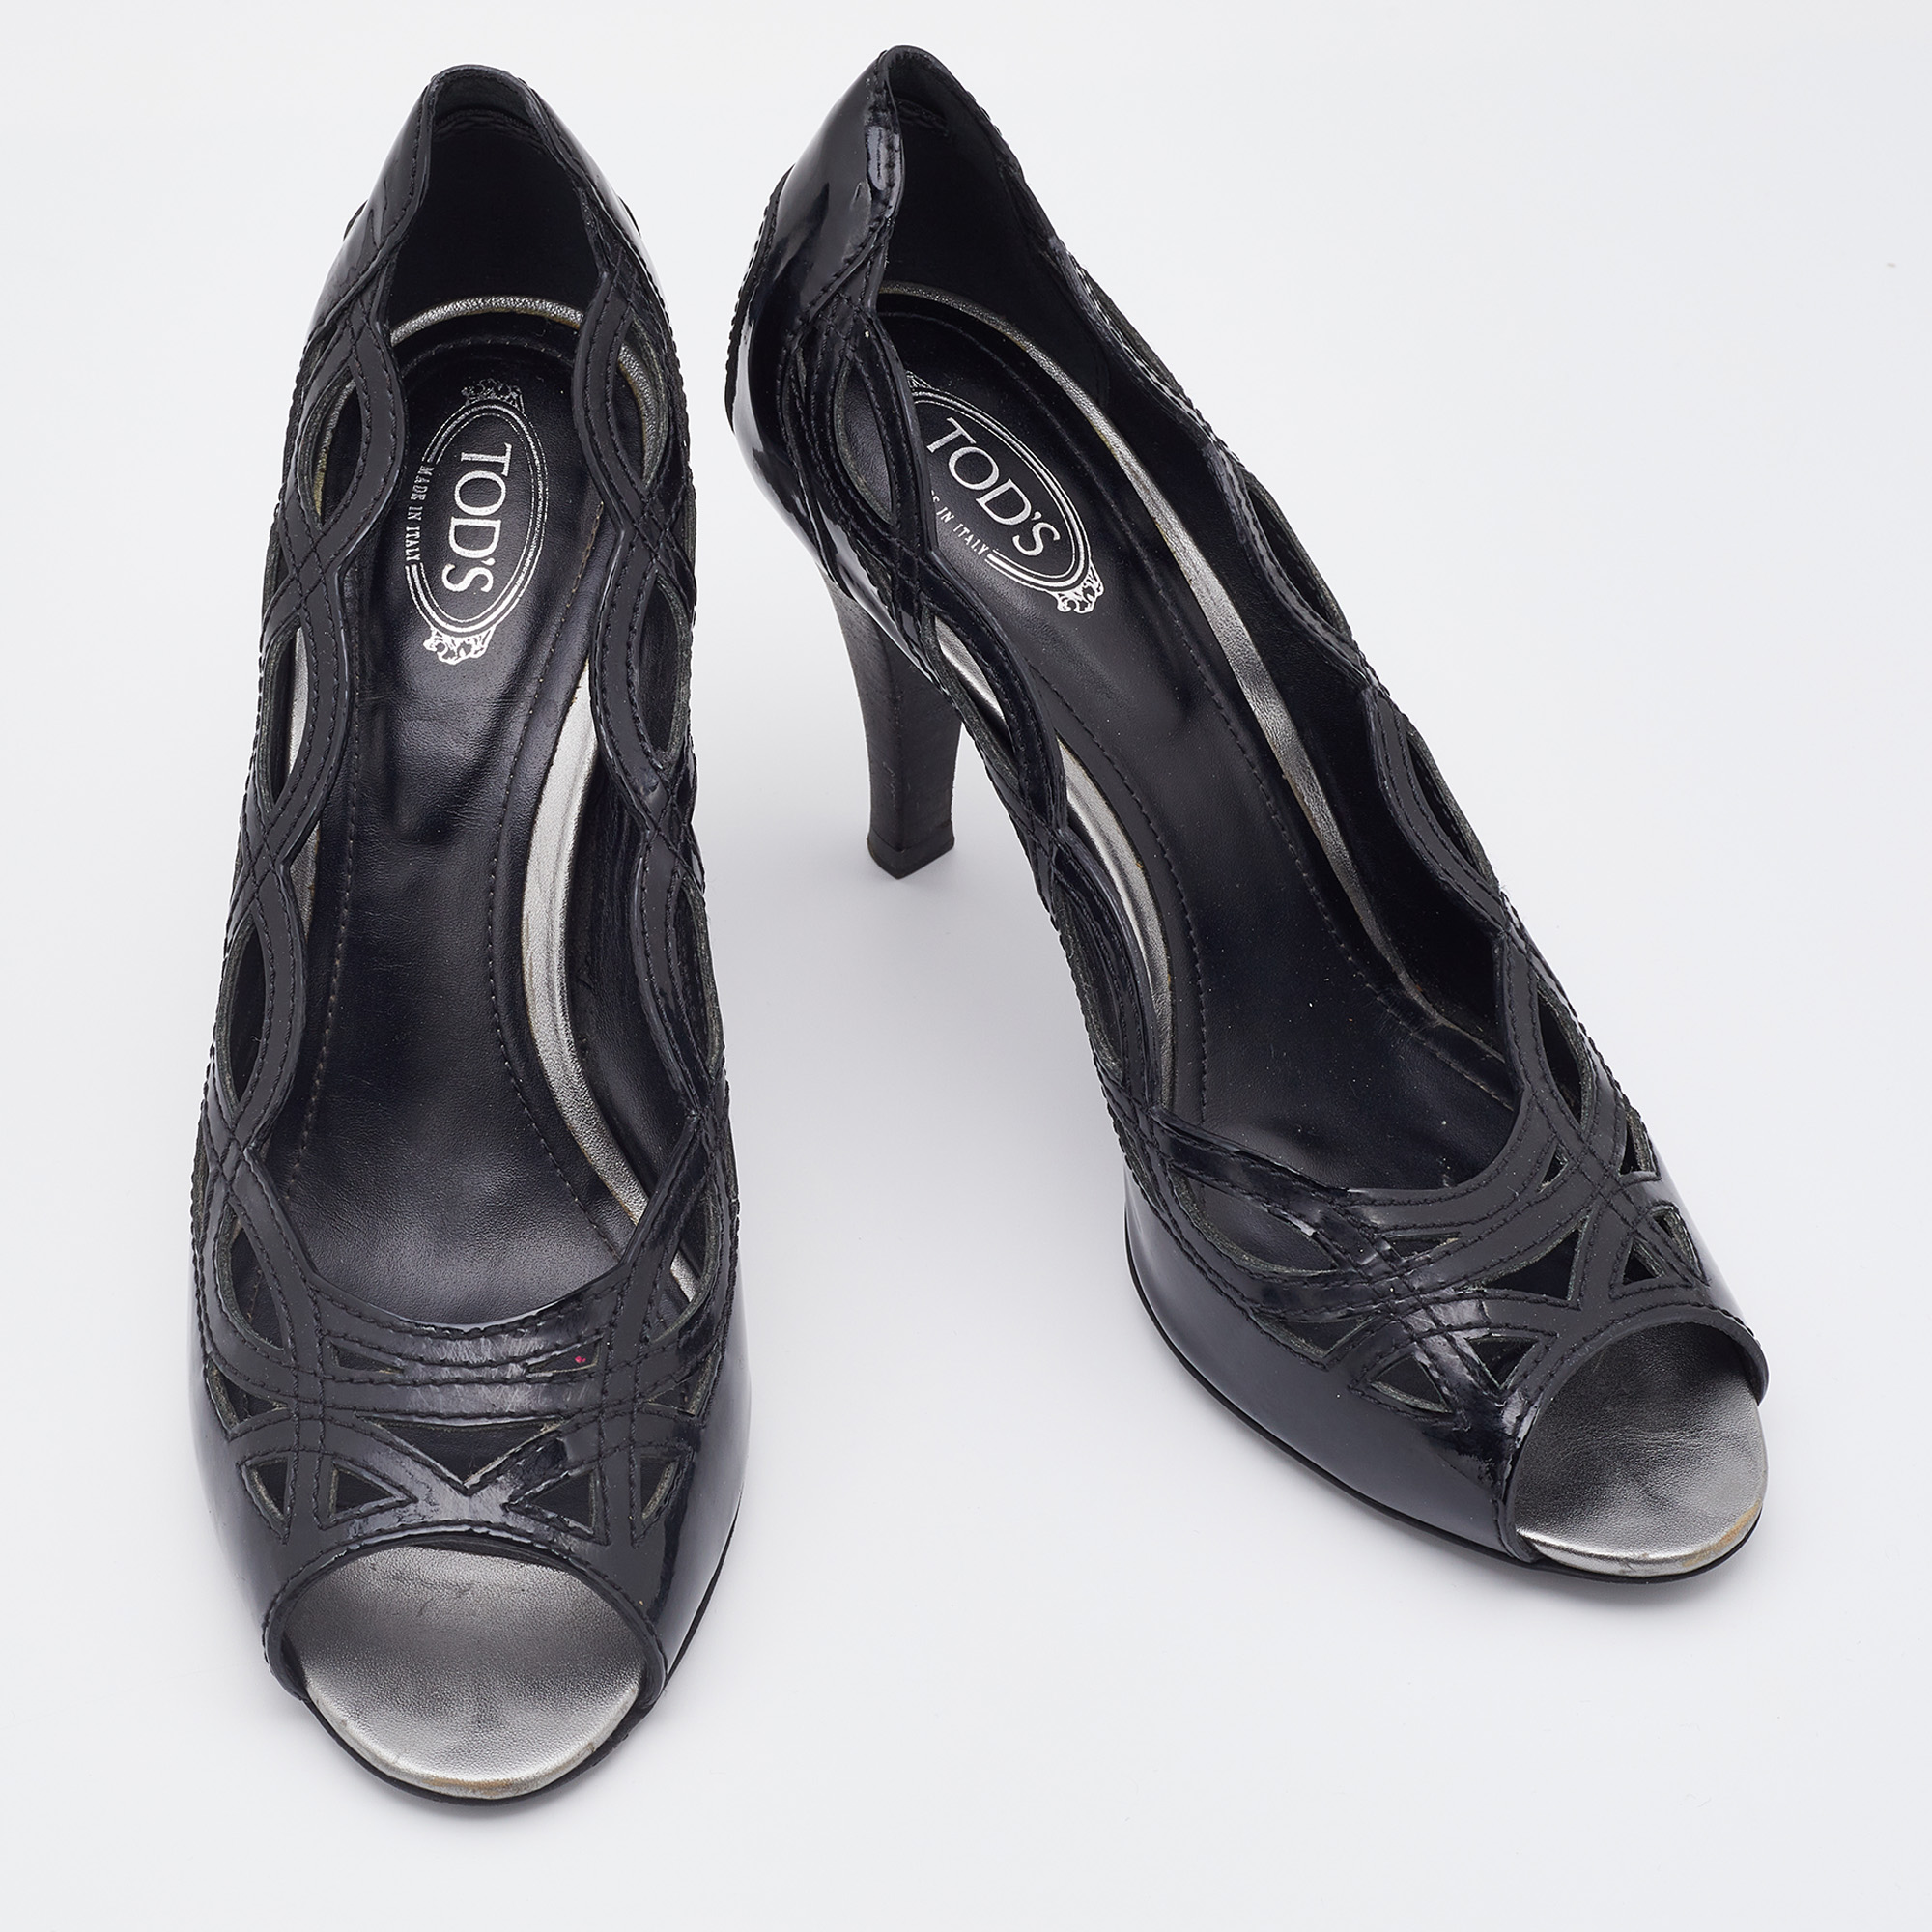 Tod's Black Patent Leather Cut-Out Peep Toe Pumps Size 38.5